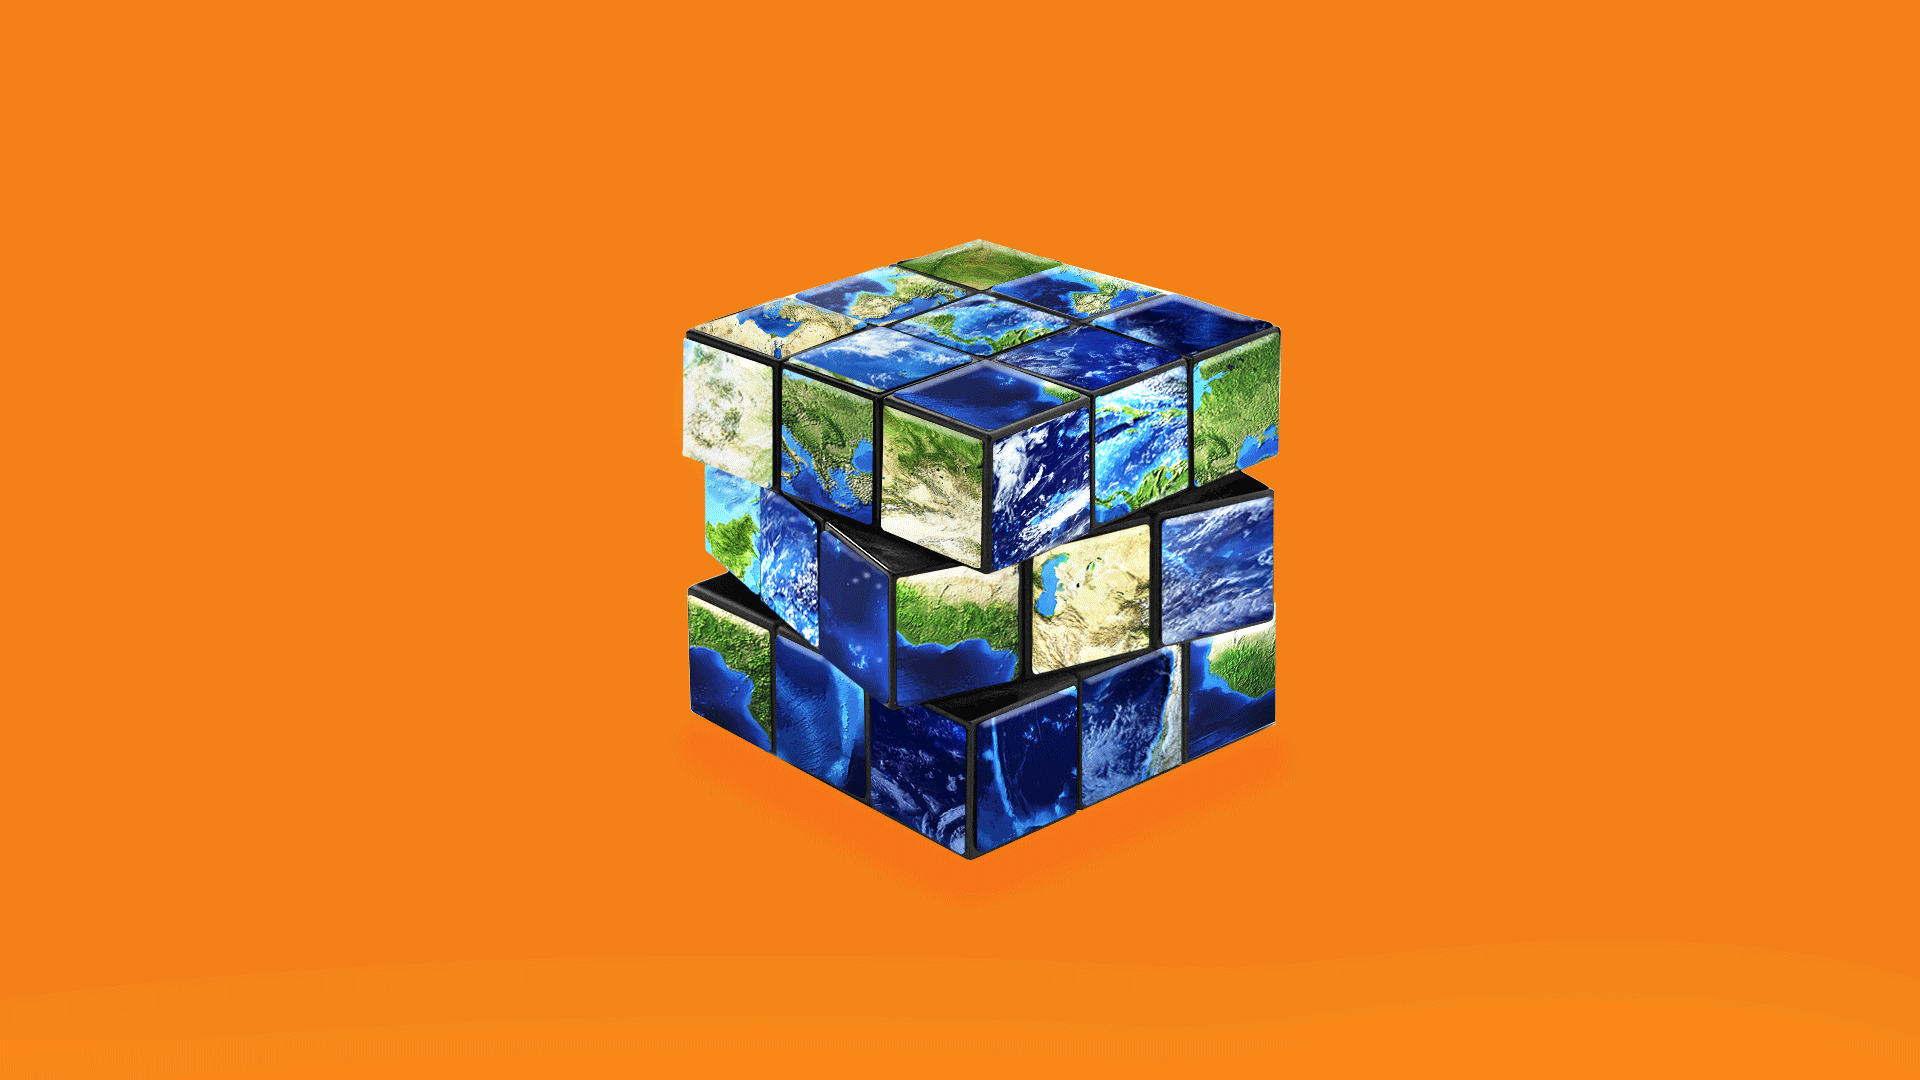 Illustration of the earth as an unsolved Rubik's Cube